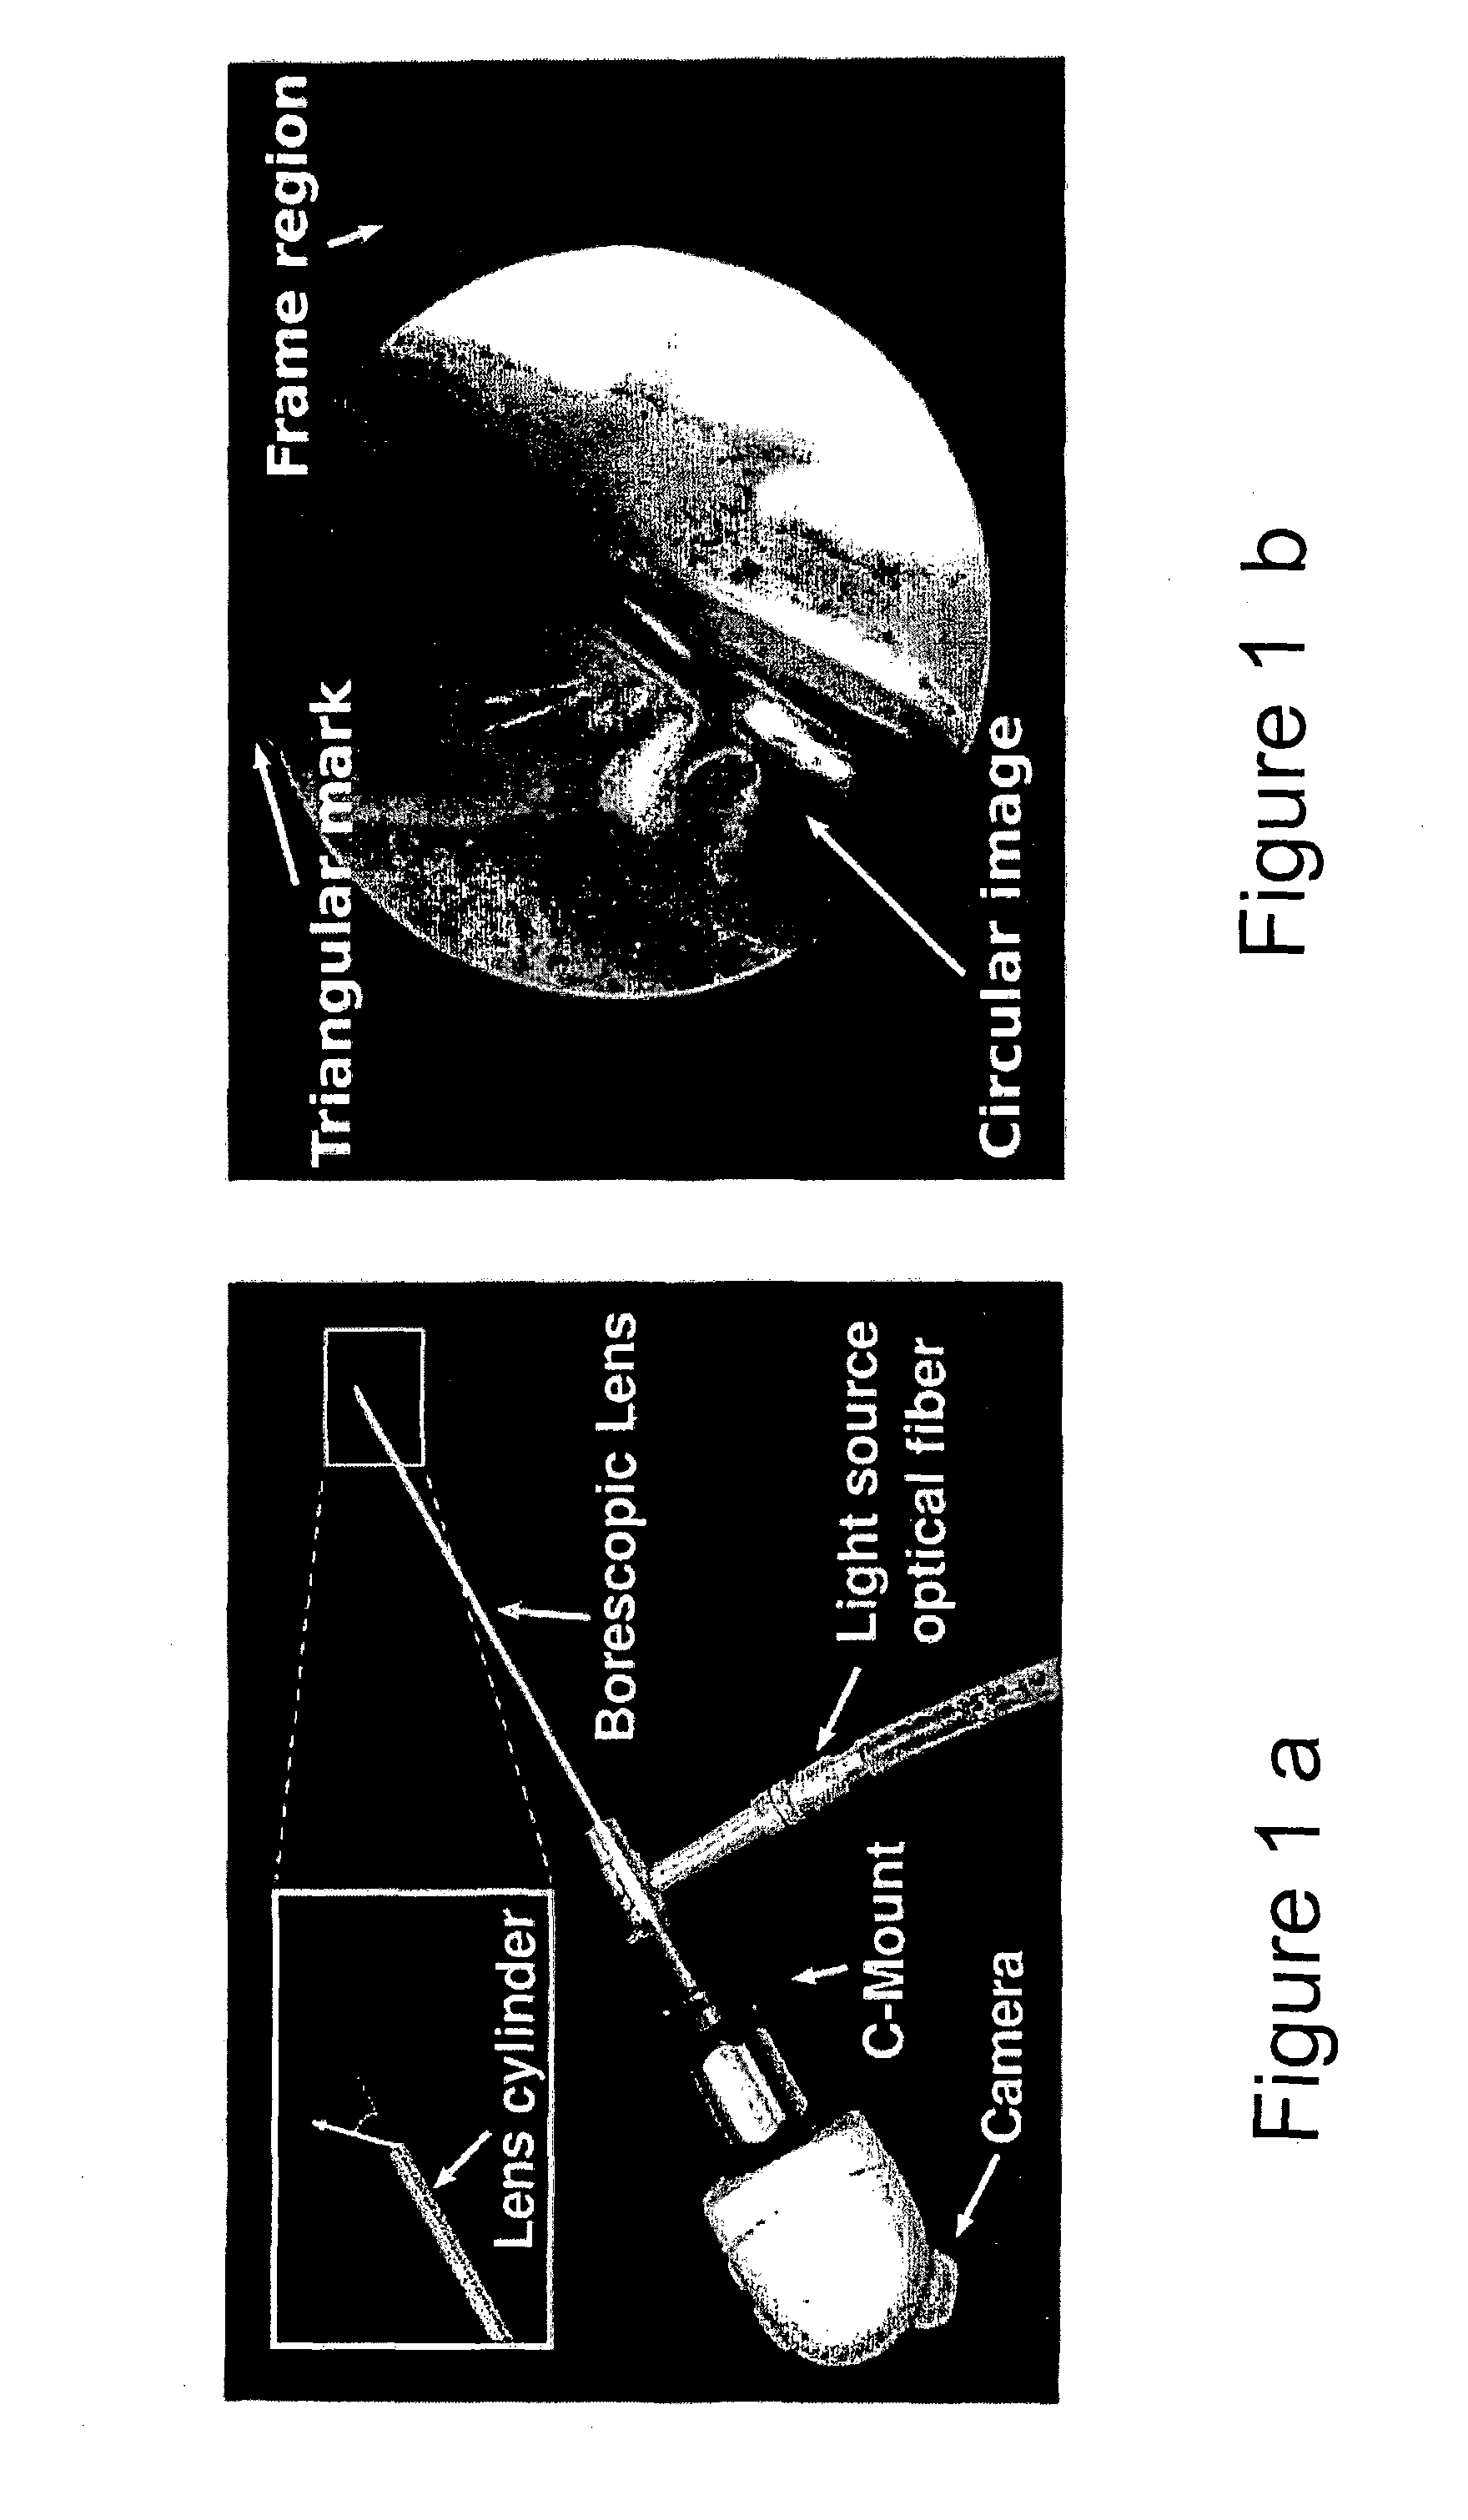 Method and apparatus for automatic camera calibration using one or more images of a checkerboard pattern